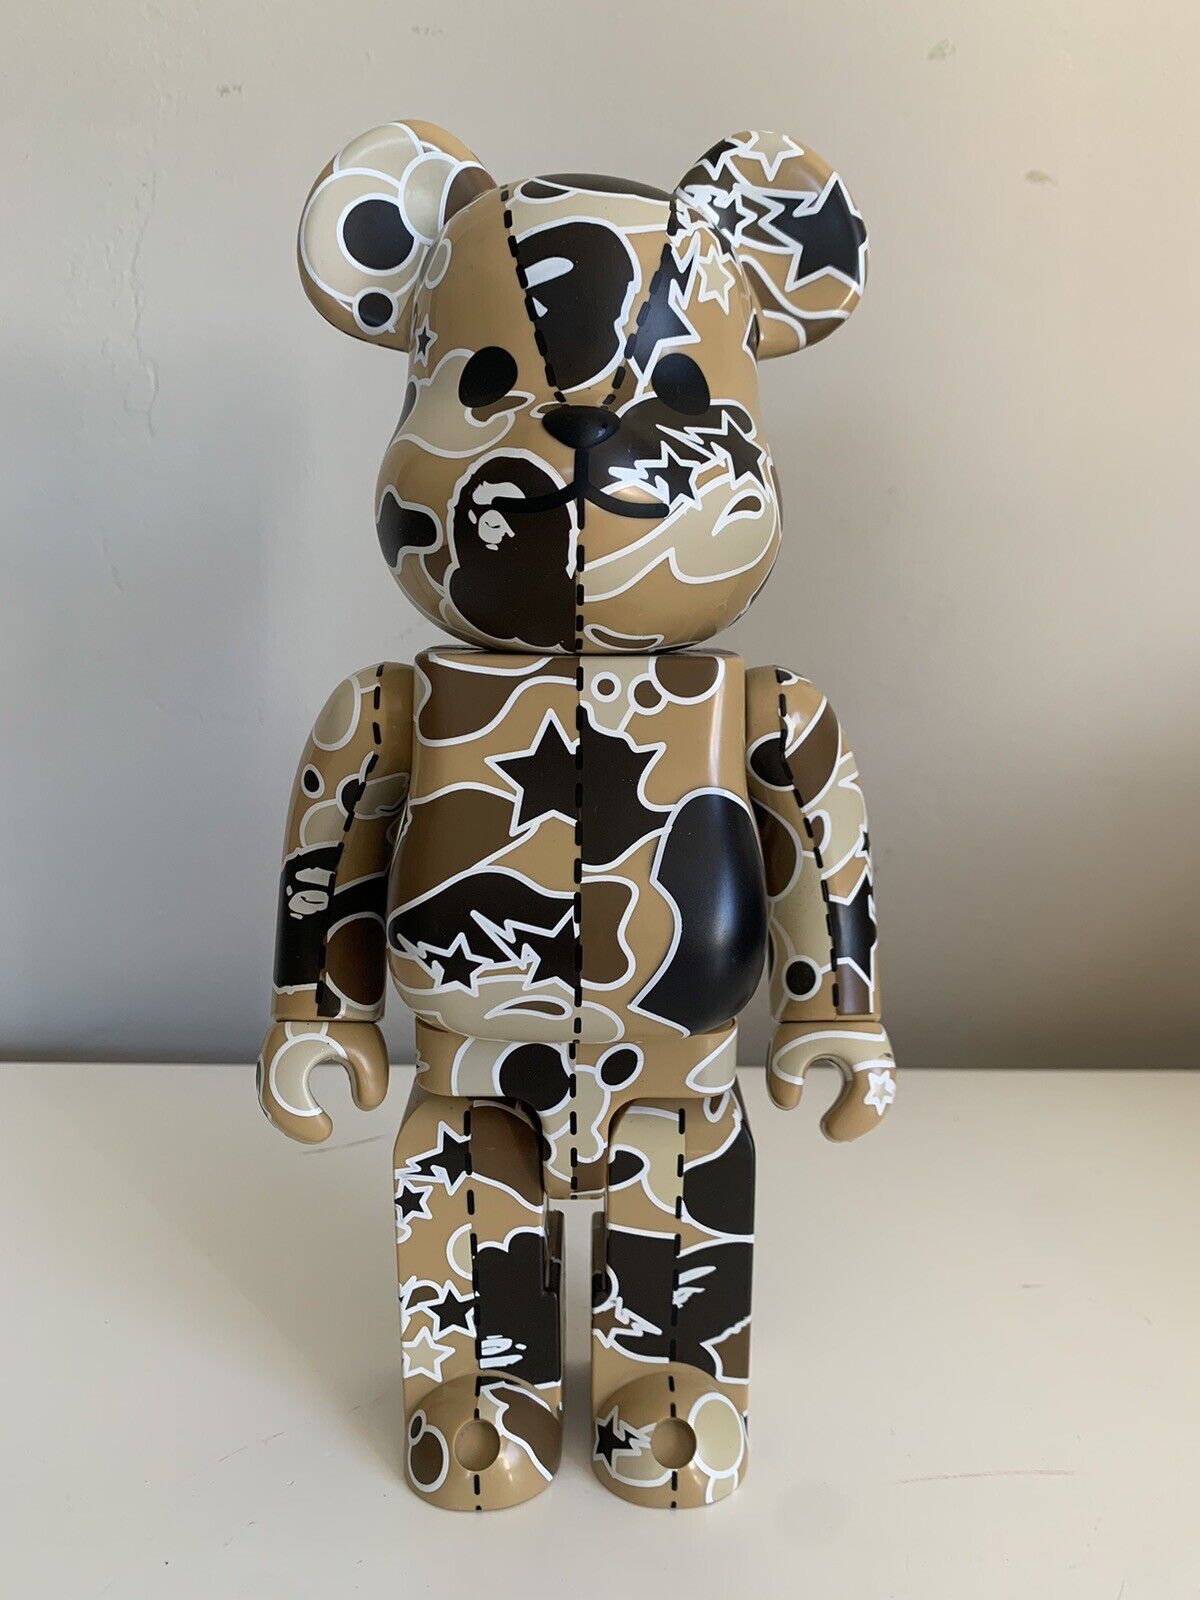 Bape x Be@rBrick  -  400%  - Brown Camo  -  Released In 2008